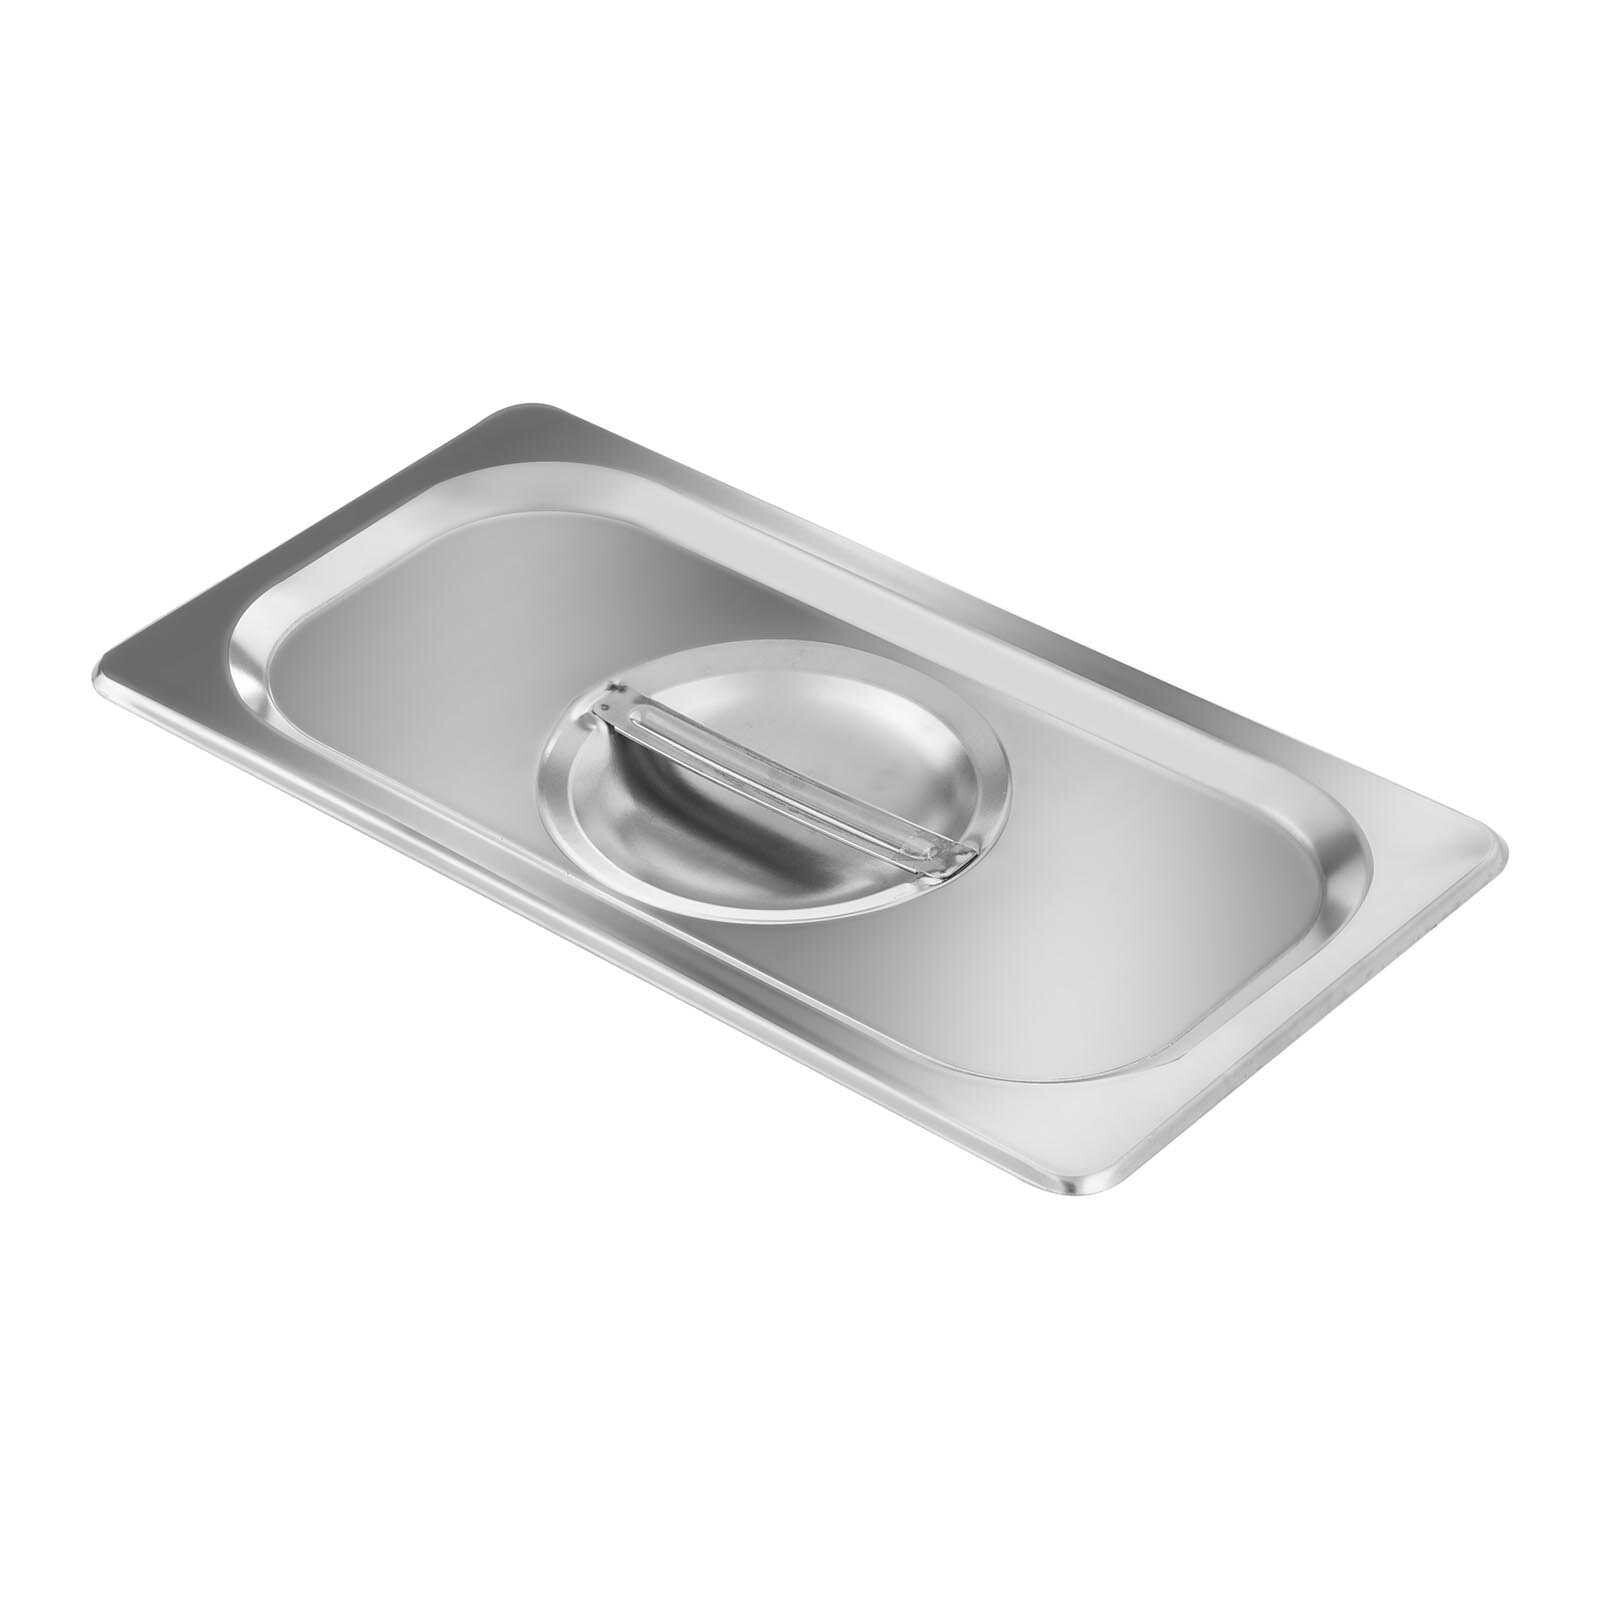 Stainless steel lid for the GN1 / 3 container